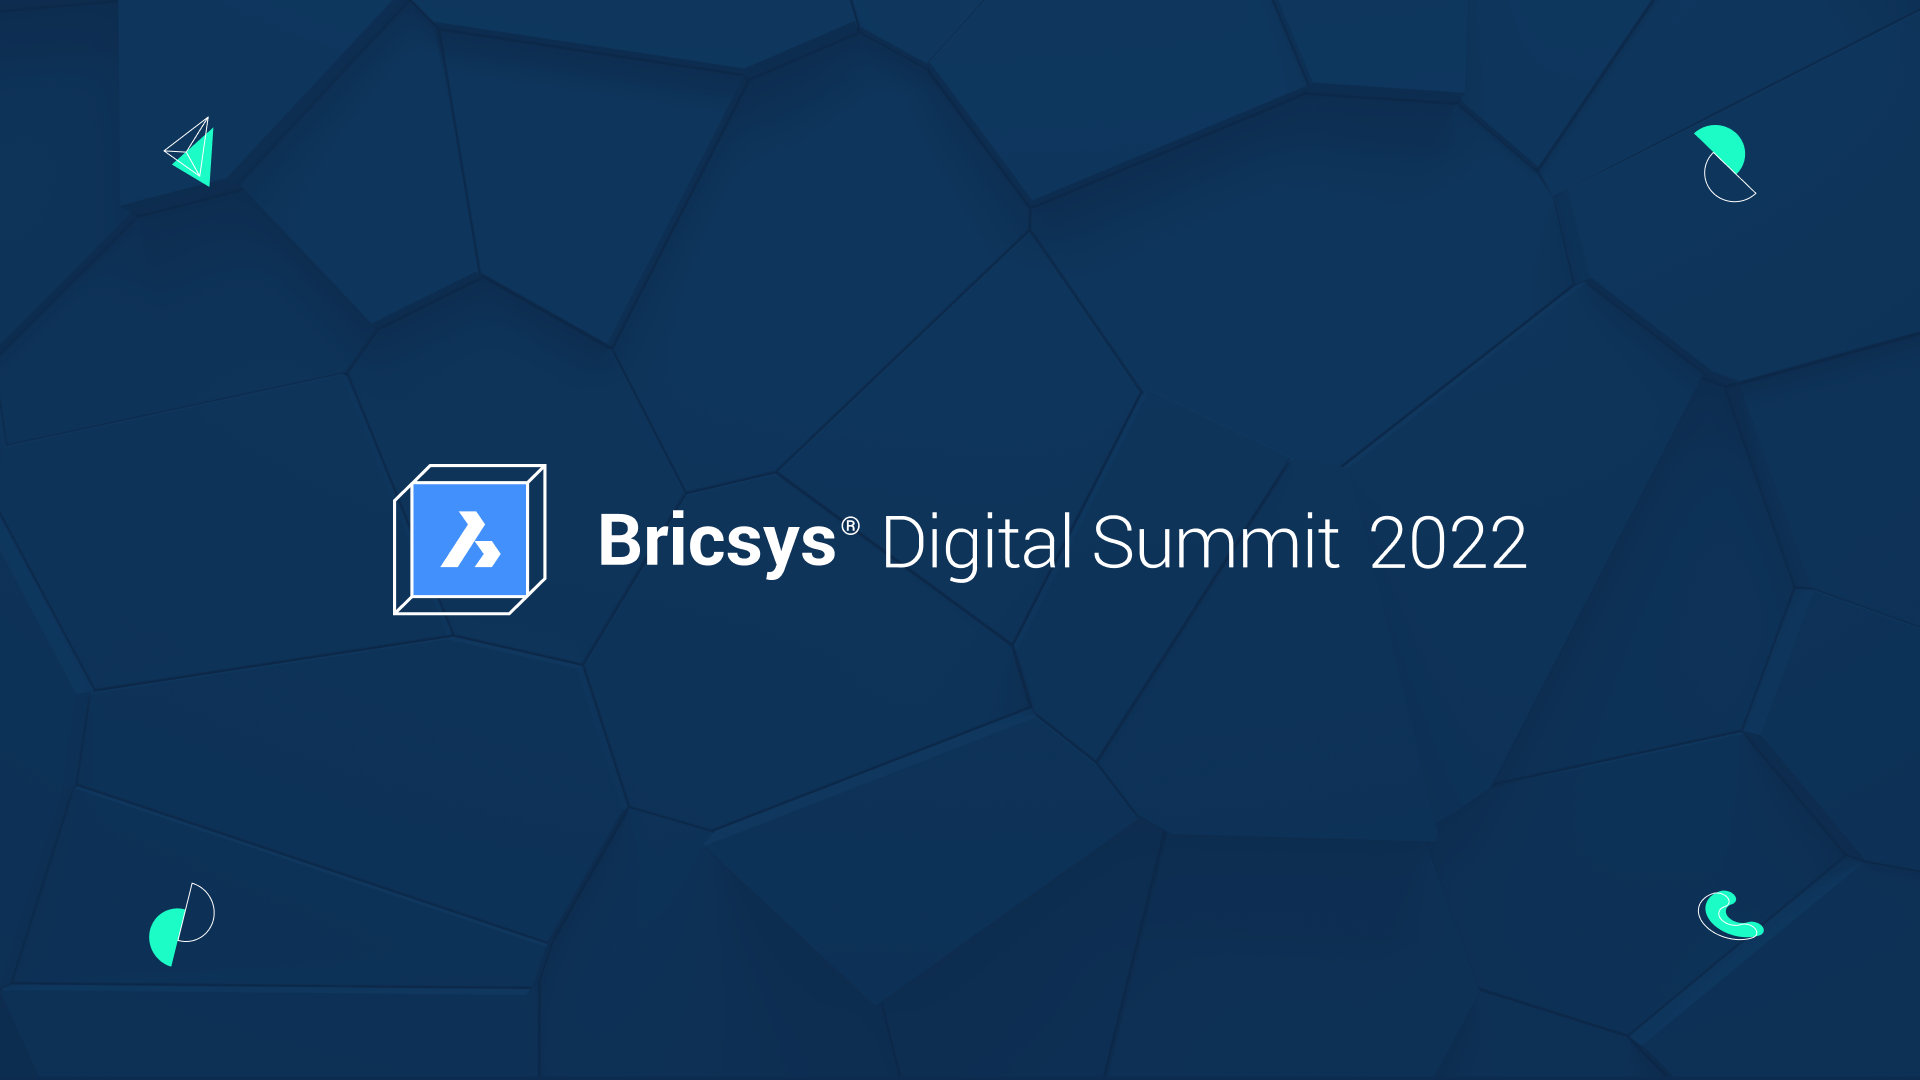 Bricsys Digital Summit: Explore the highlights and hear about the innovations to help you Build Better